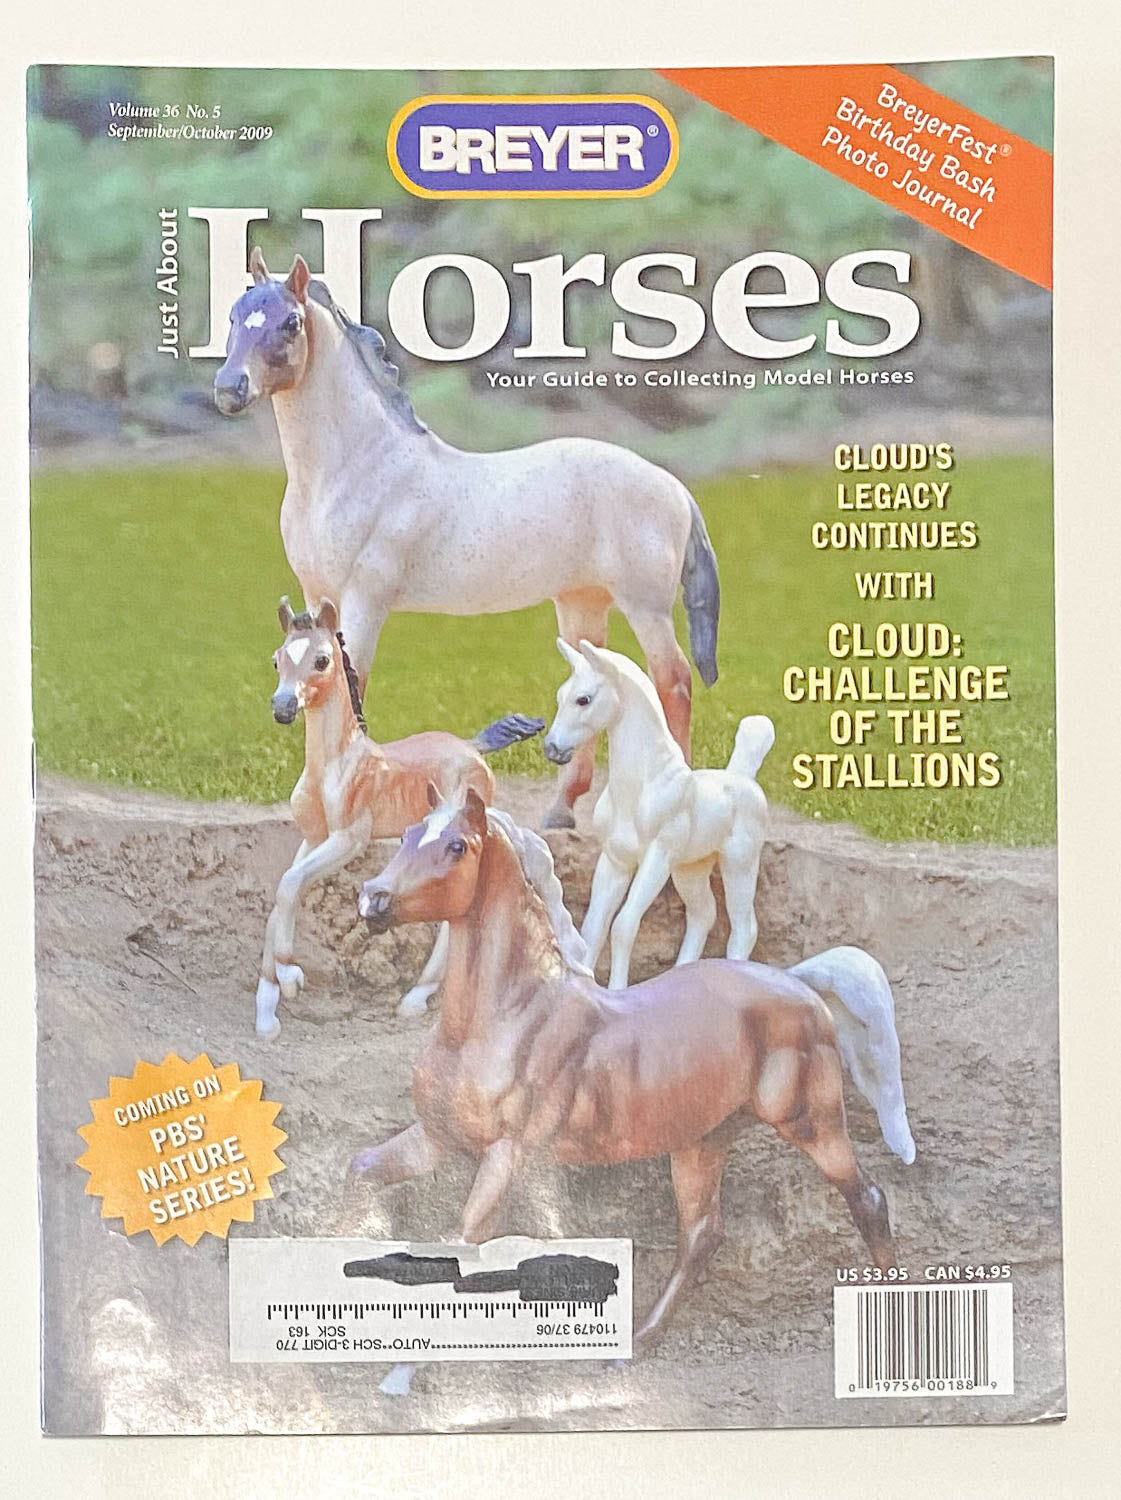 Just About Horses Magazine Vol. 36, No. 5, 2009 Sept/Oct